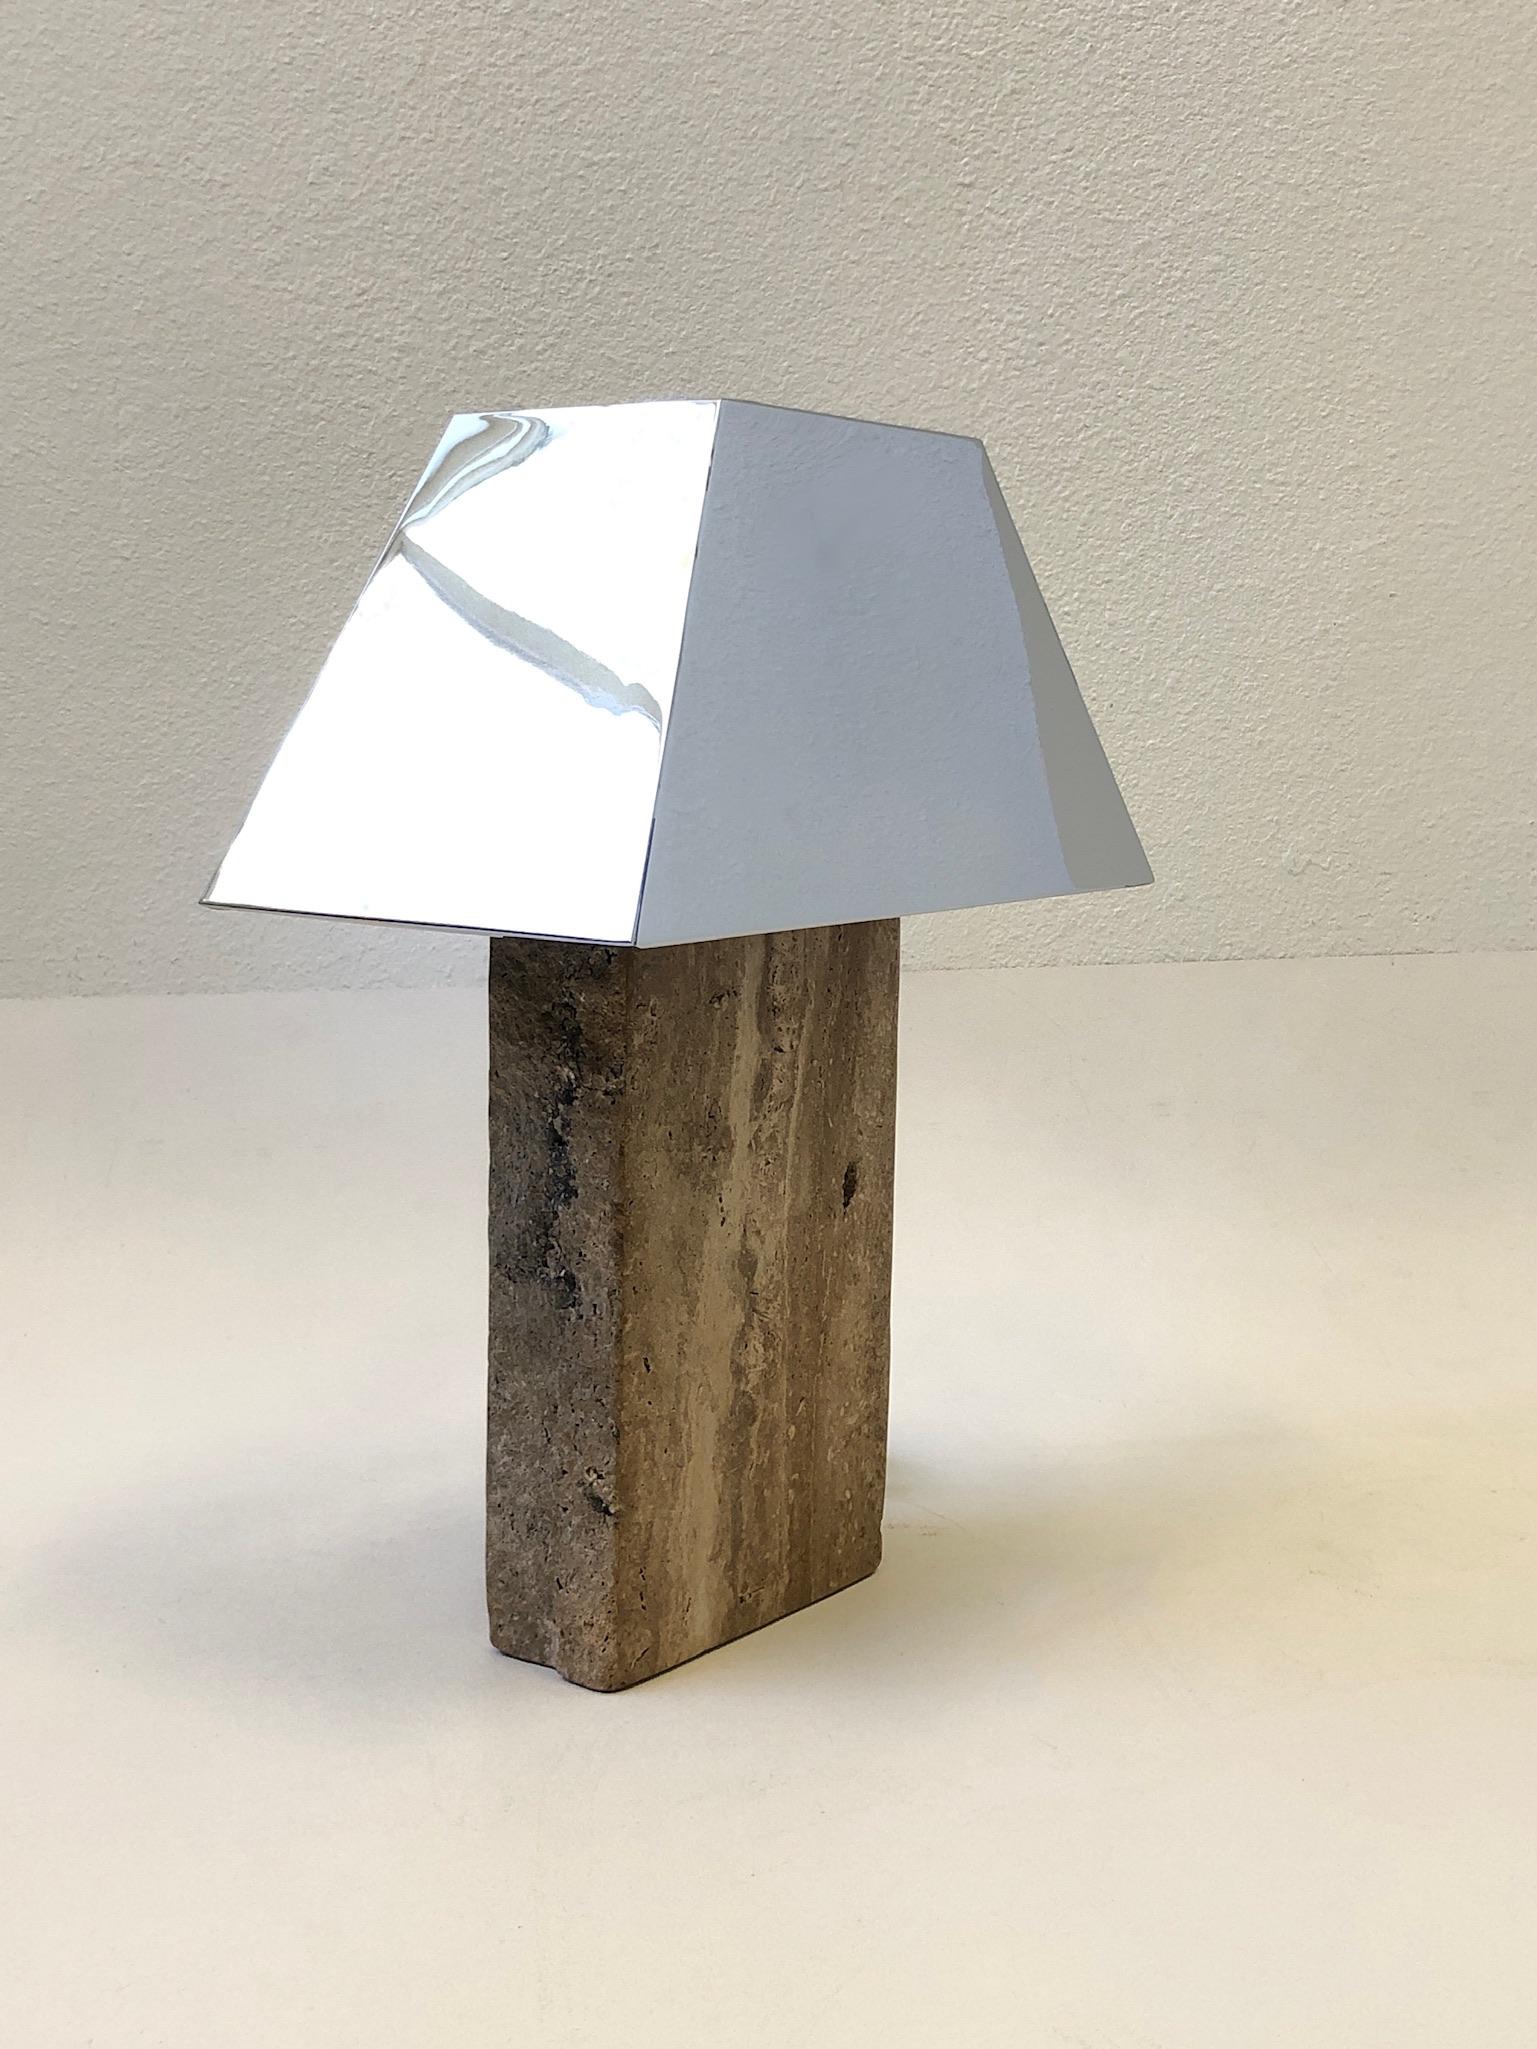 1980’s Italian travertine with a polished chrome shade table lamp in the manner of Karl Springer. 
The travertine is polished on the front and back, the sides are left natural rough texture. 
Purchased with several other KS items from a Steve